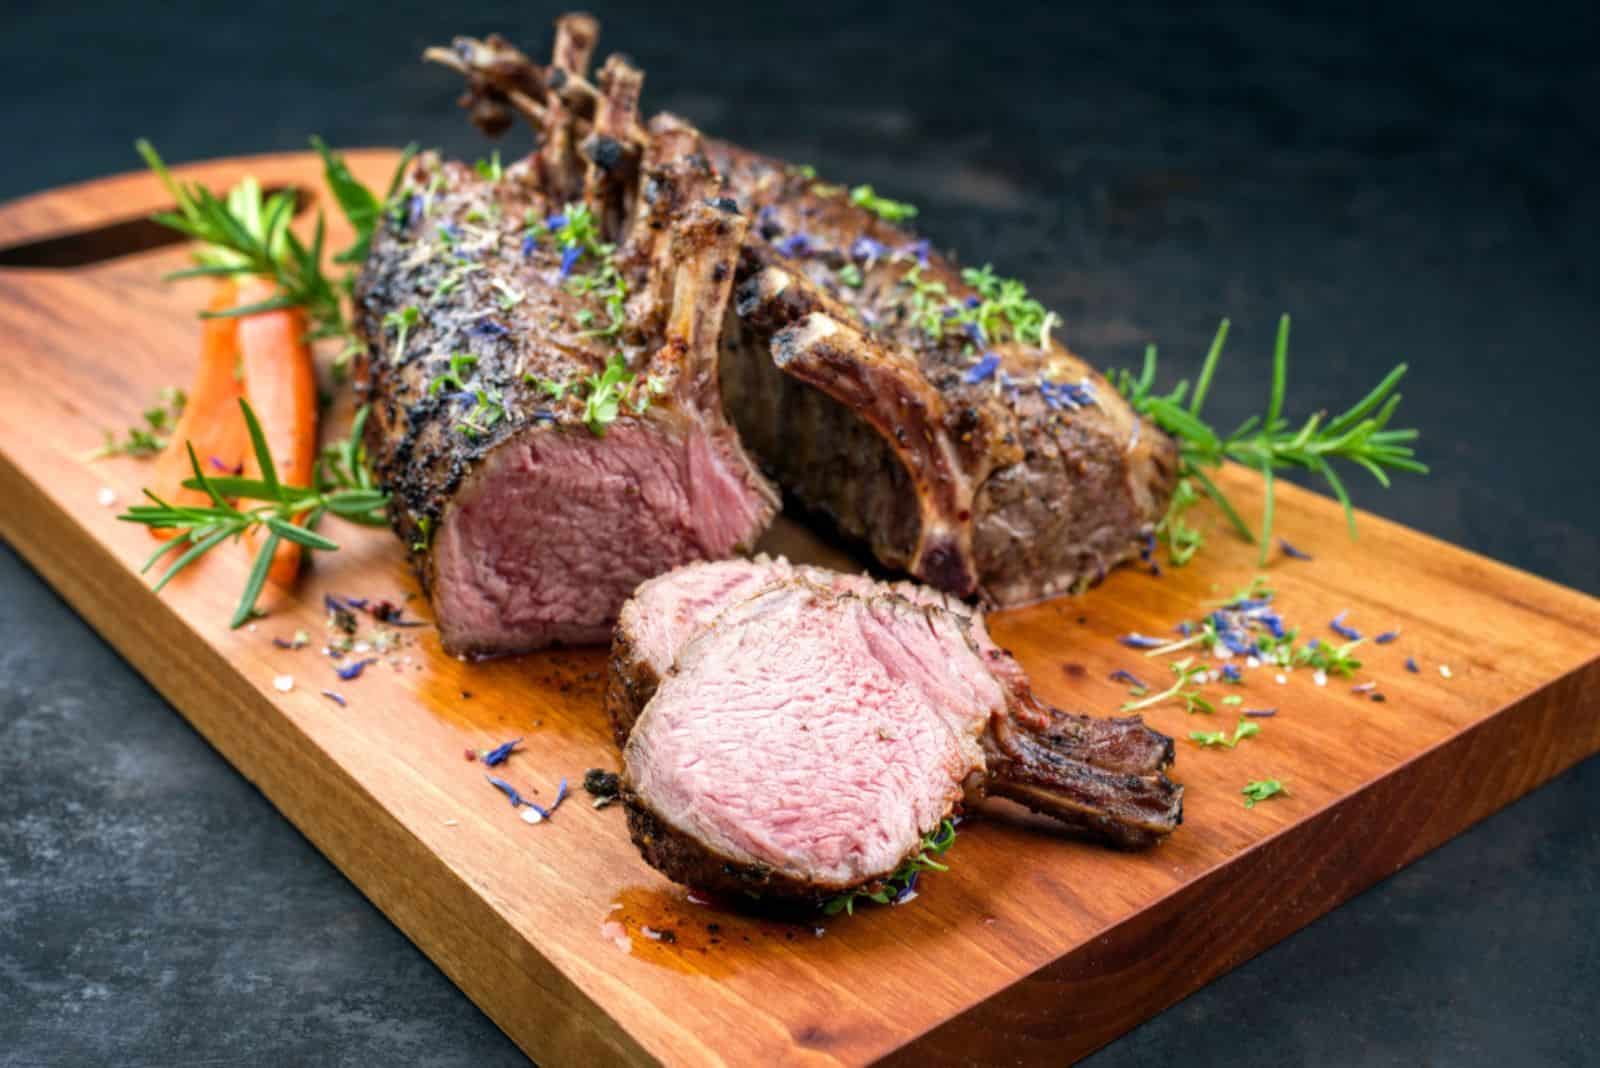 Barbecue rack of lamb with carrot and herbs